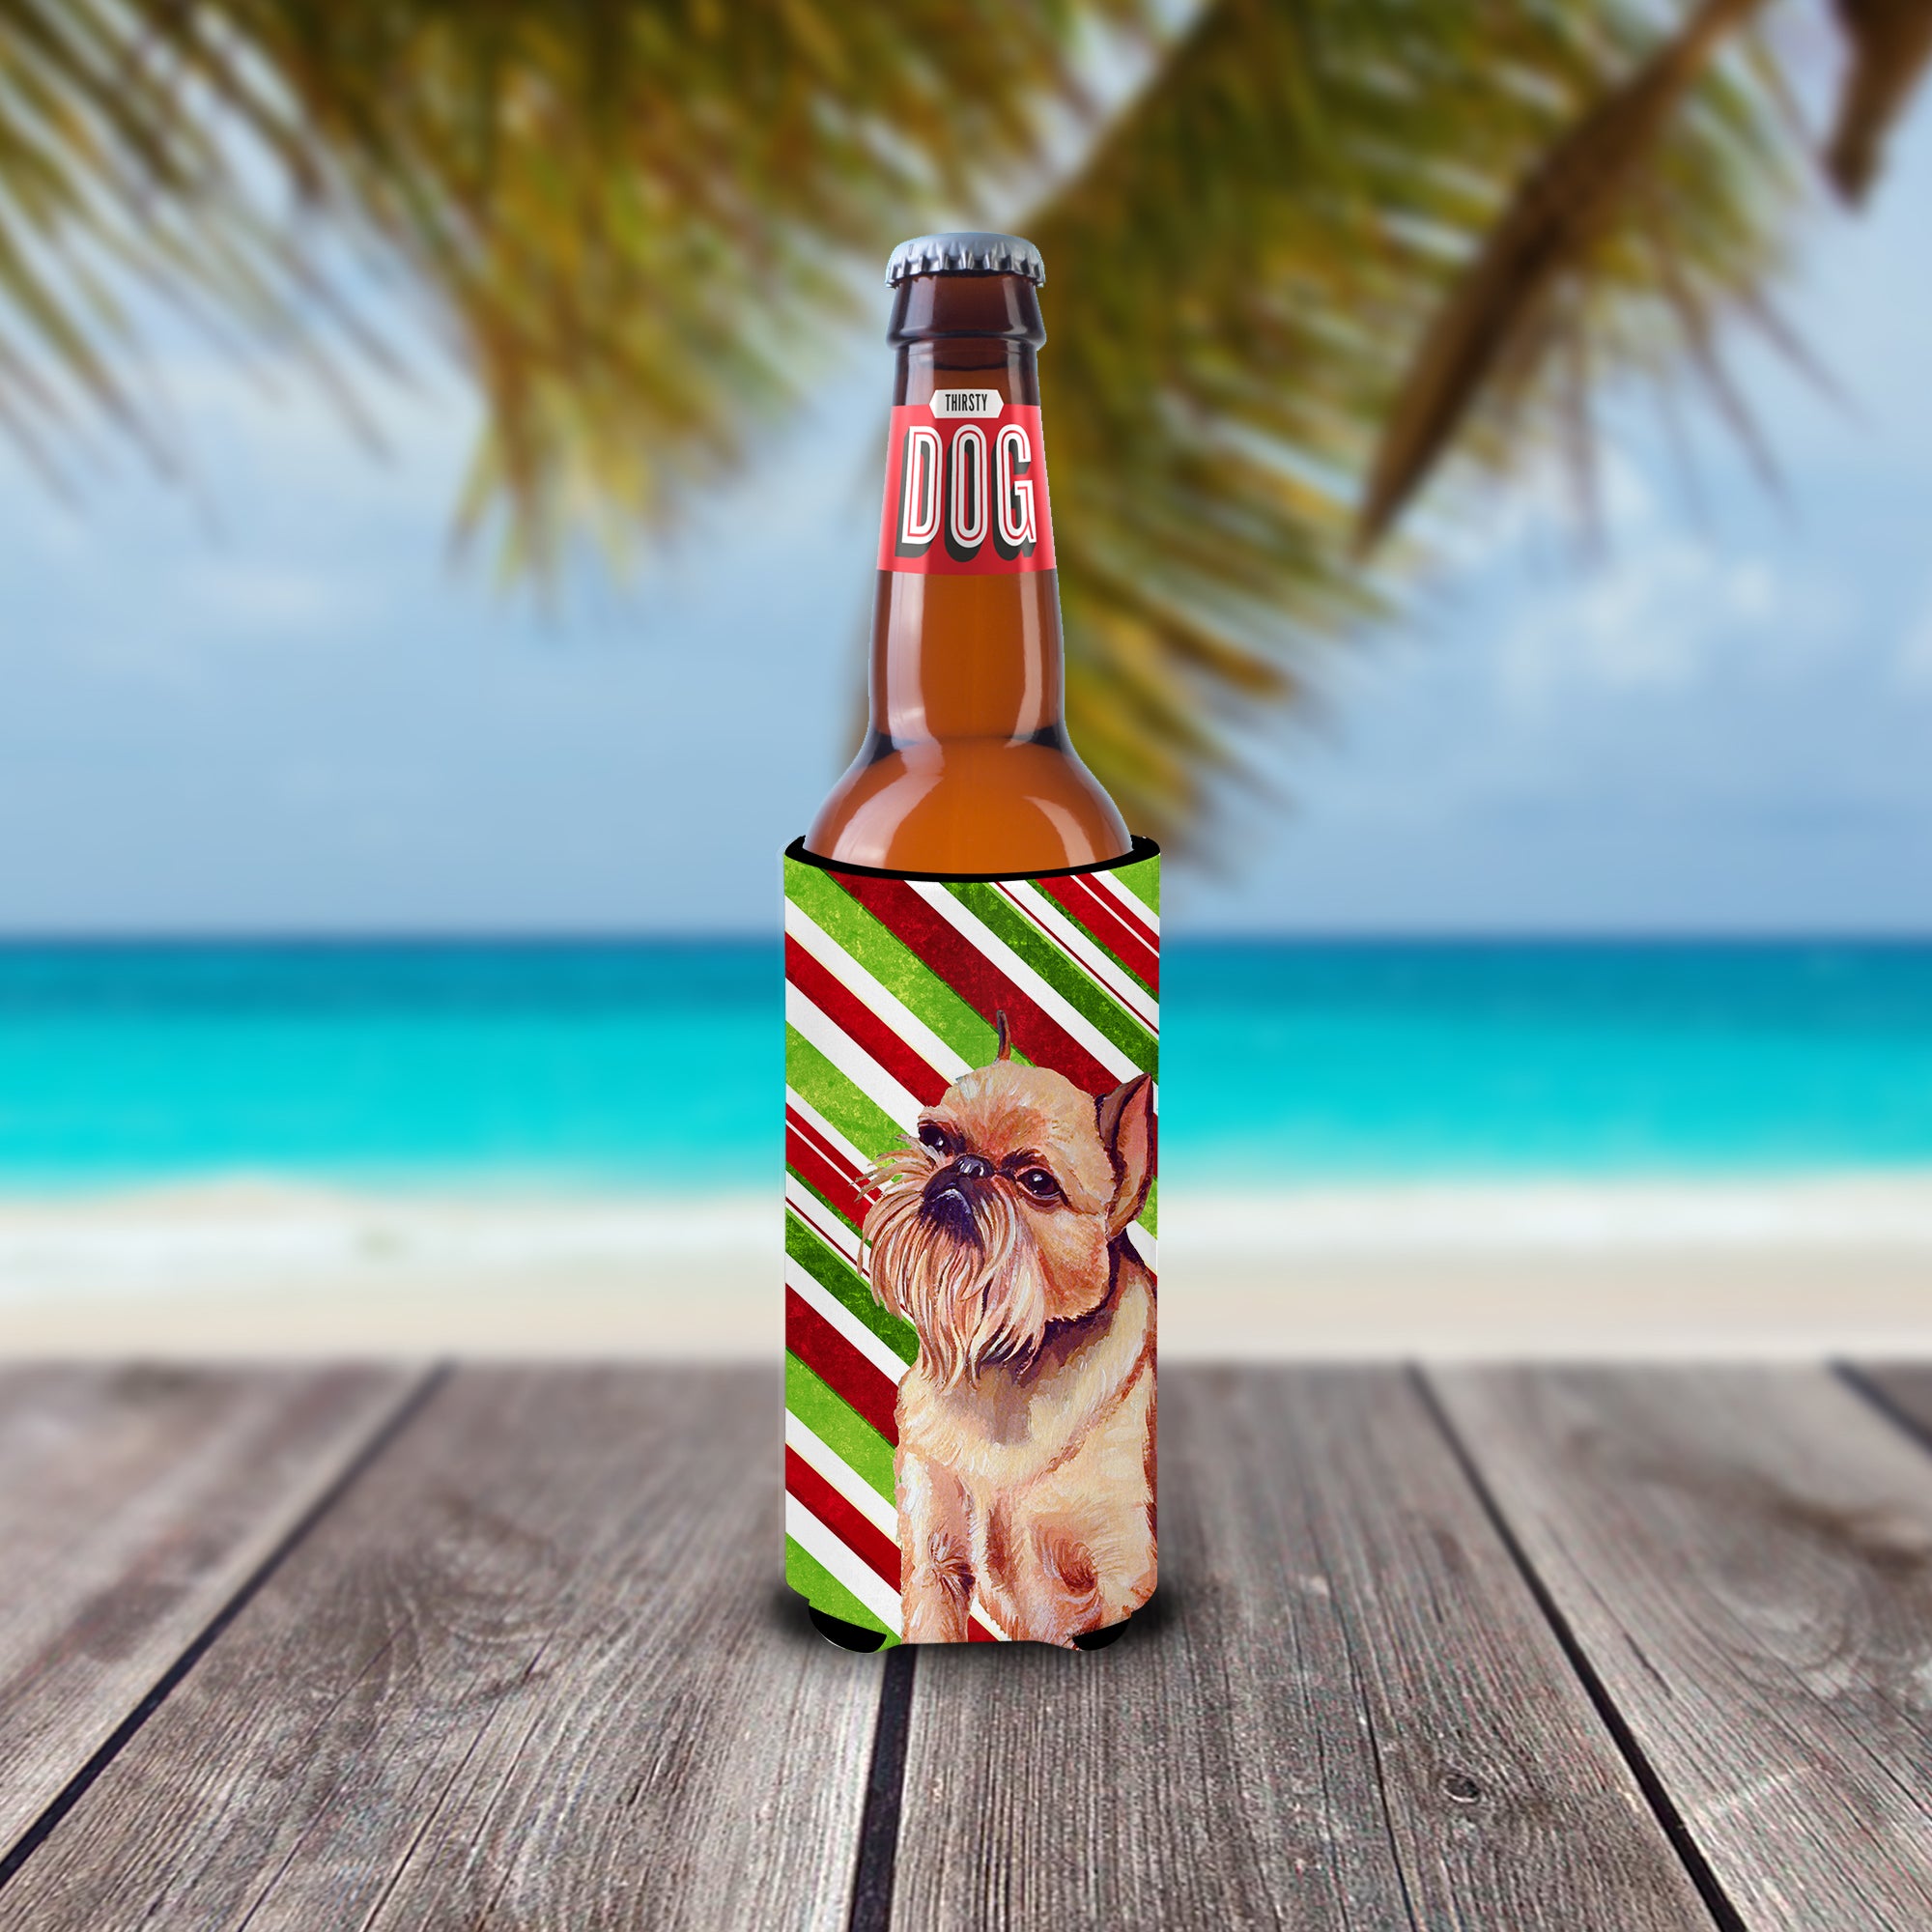 Brussels Griffon Candy Cane Holiday Christmas Ultra Beverage Isolateurs pour canettes minces LH9224MUK